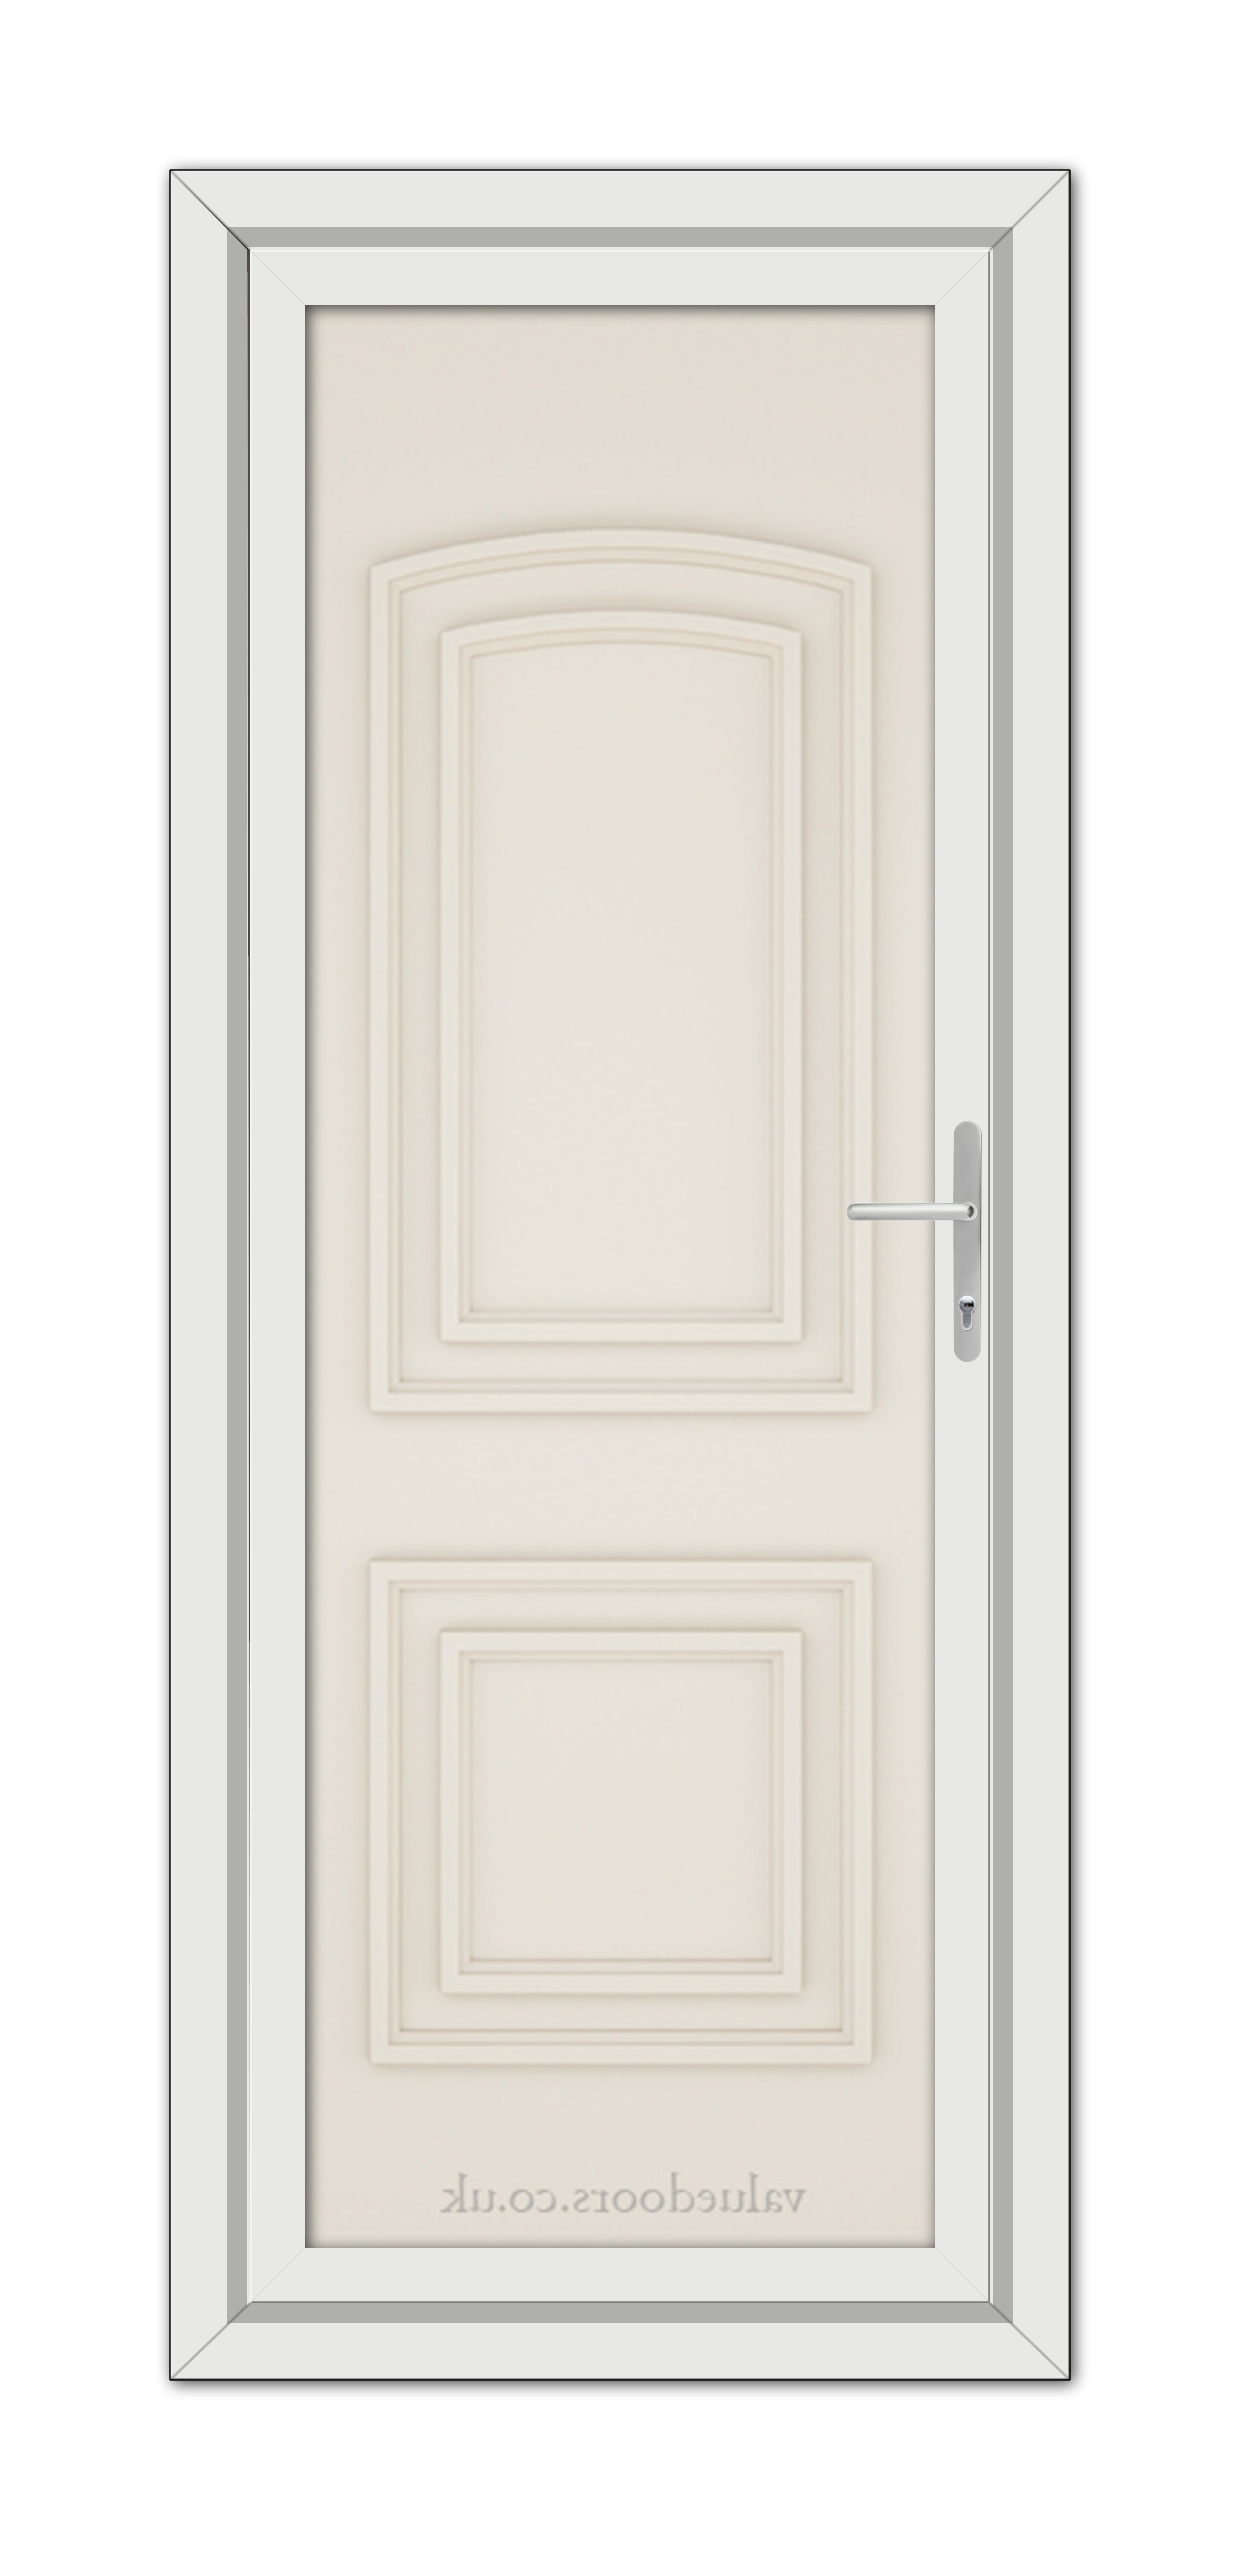 A vertical image of a closed, Cream Balmoral Solid uPVC Door with a silver handle and a rectangular frame, isolated on a white background.